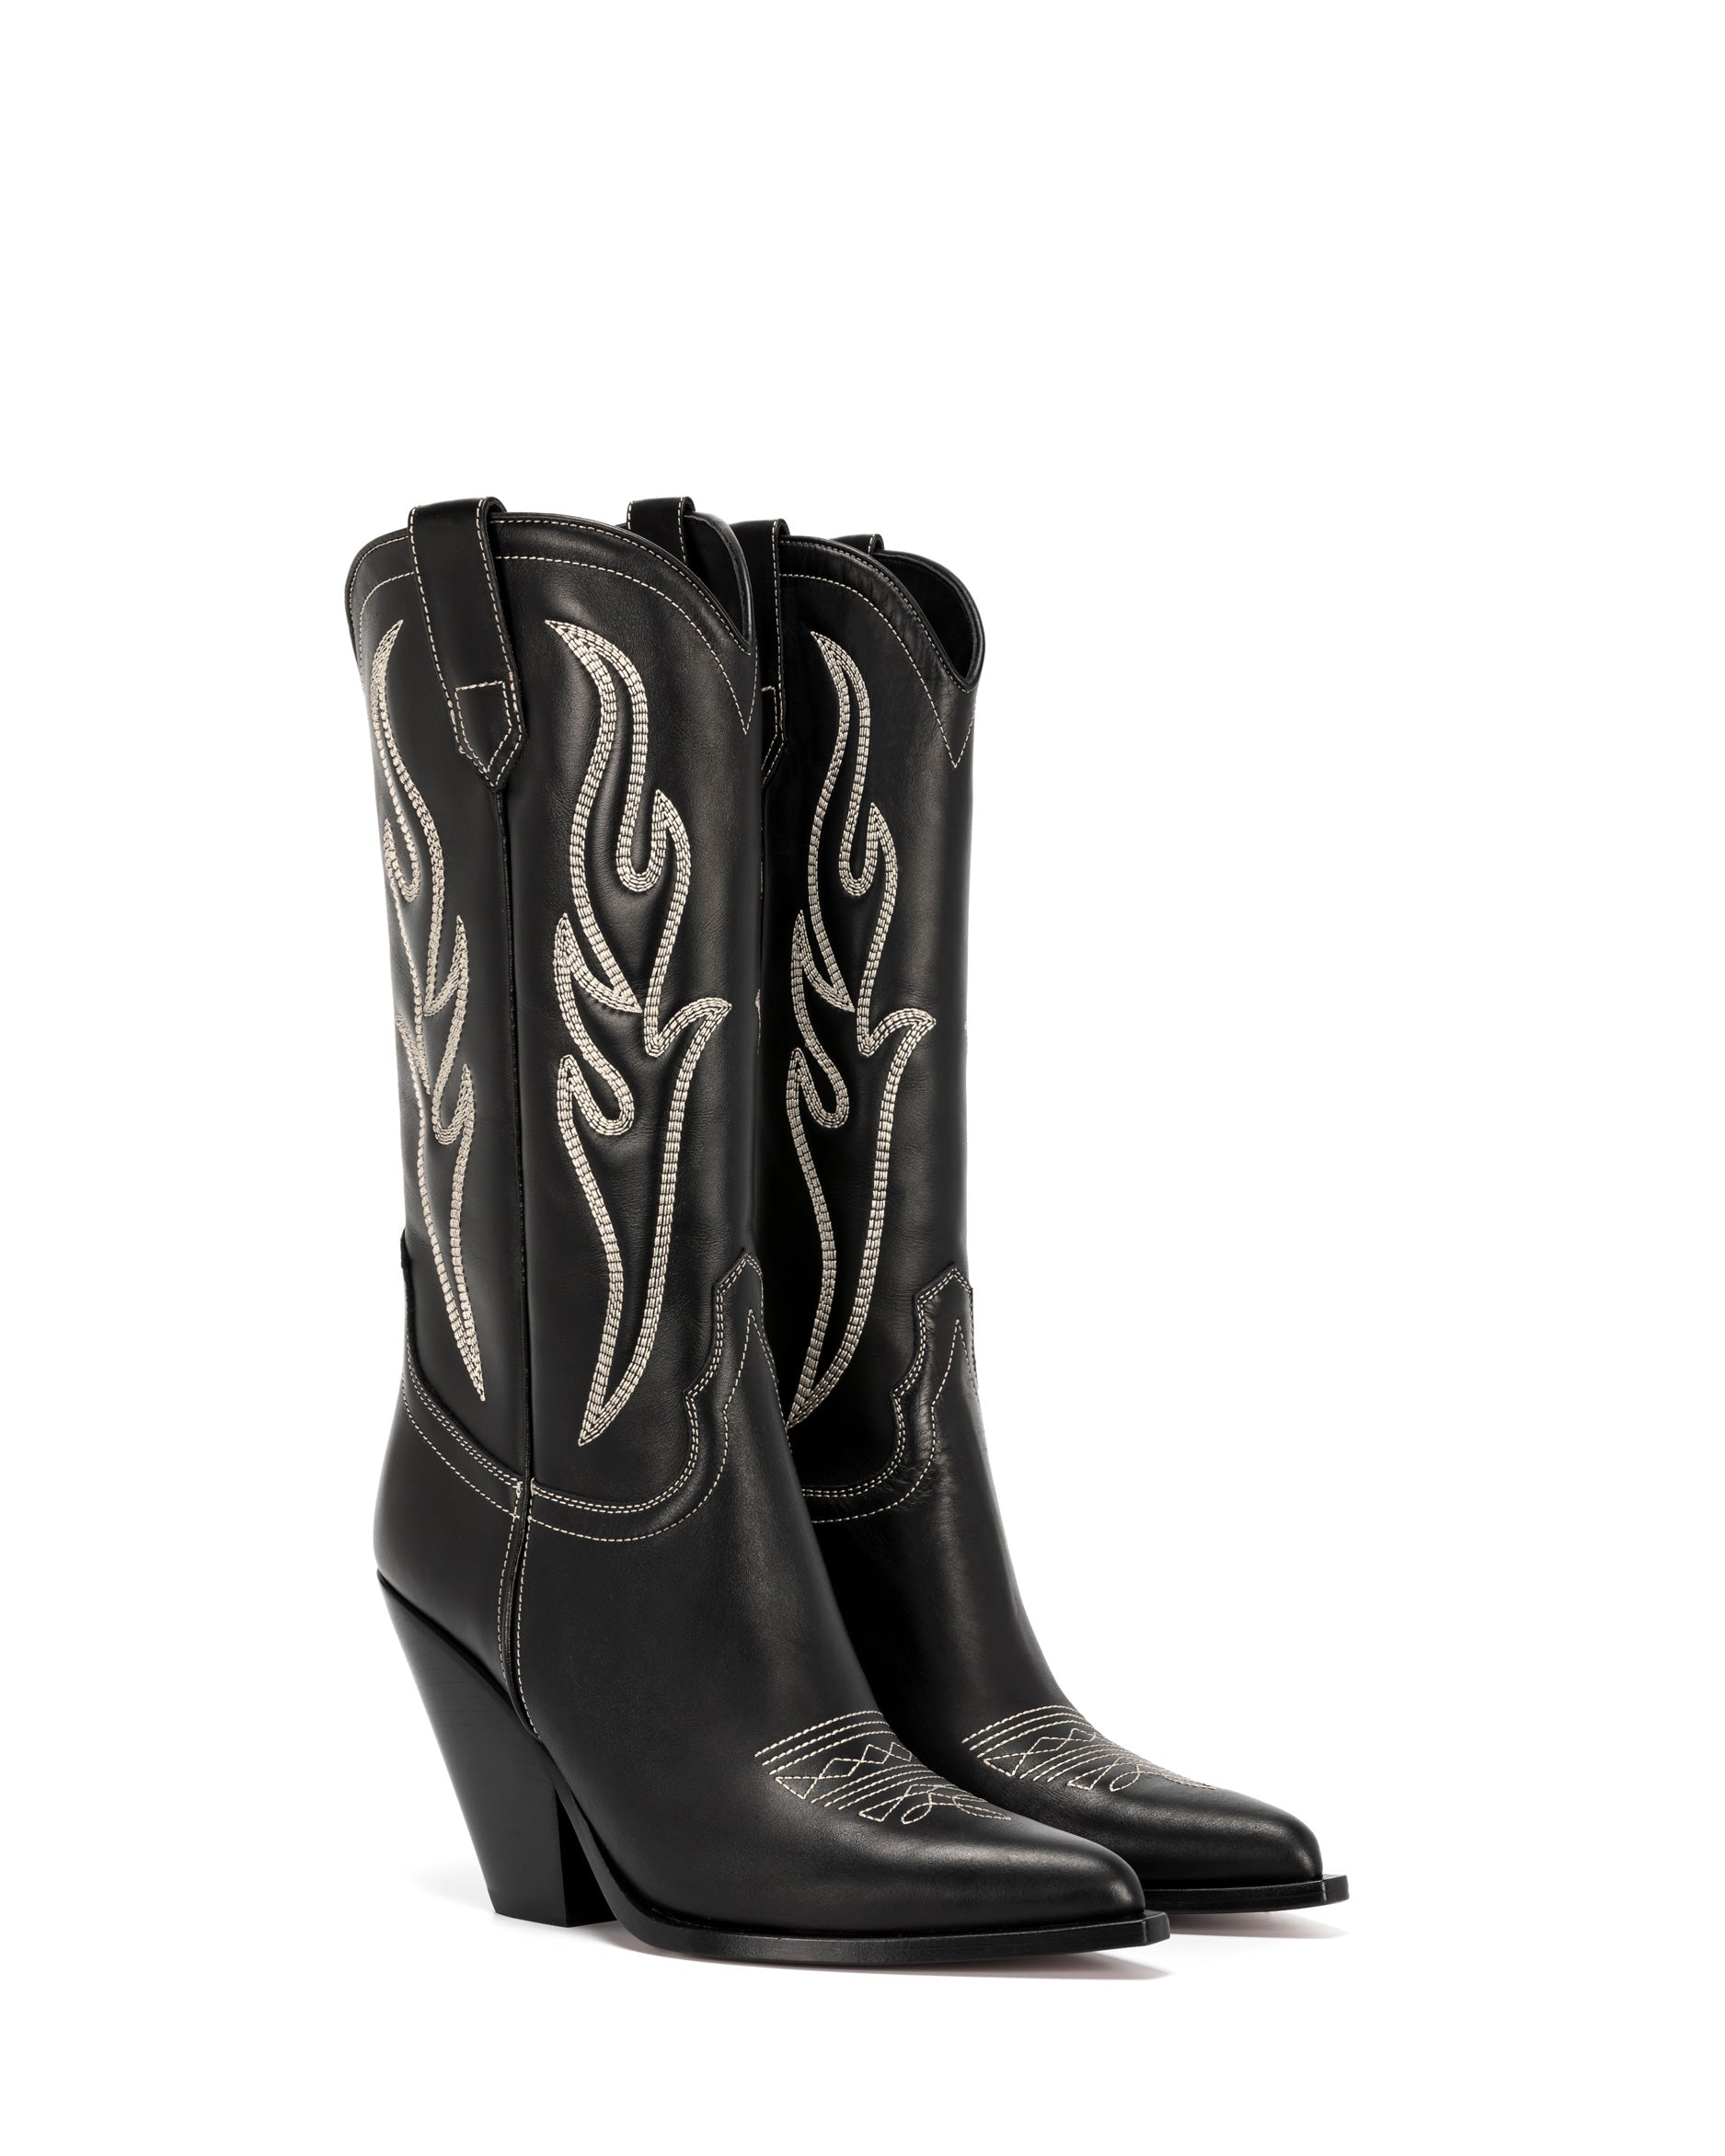 SANTA-FE-90-Women_s-Cowboy-Boots-in-Black-Calfskin-Off-White-Embroidery_02_Front